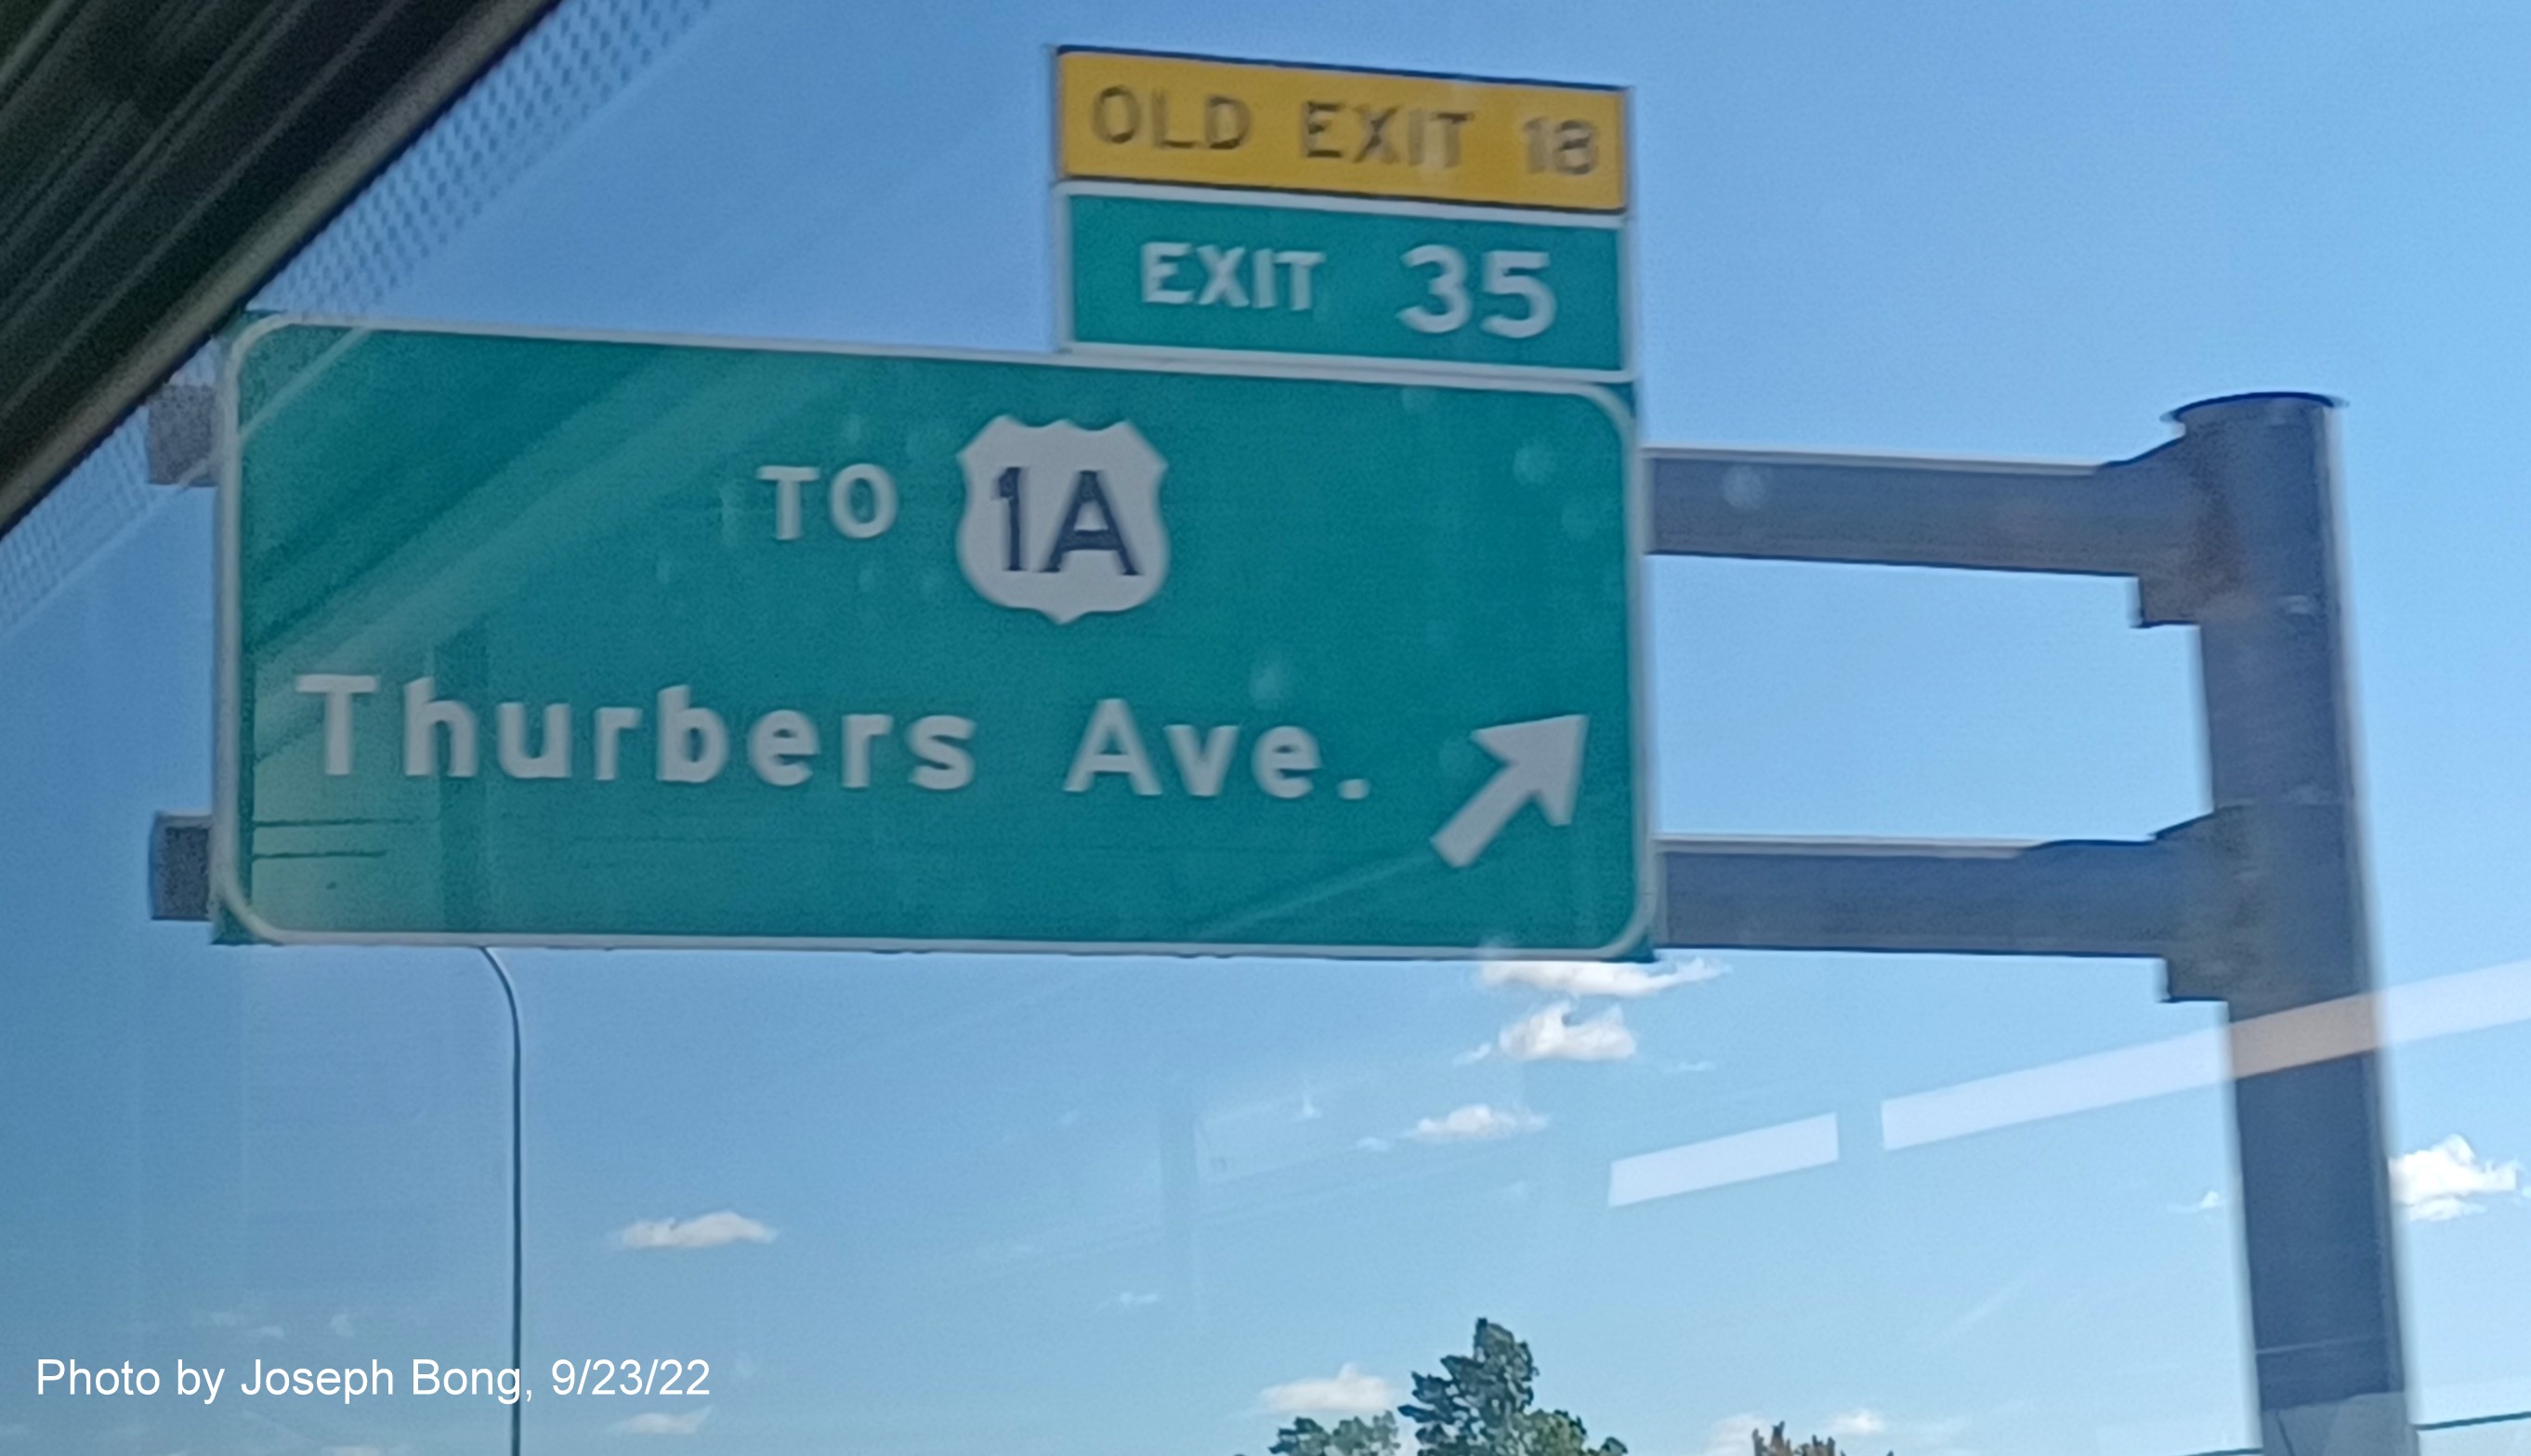 Image of overhead ramp sign for US 1A exit with new milepost based exit number and yellow Old Exit 18 sign above exit tab on I-95 South in Providence, by Joseph Bong, September 2022